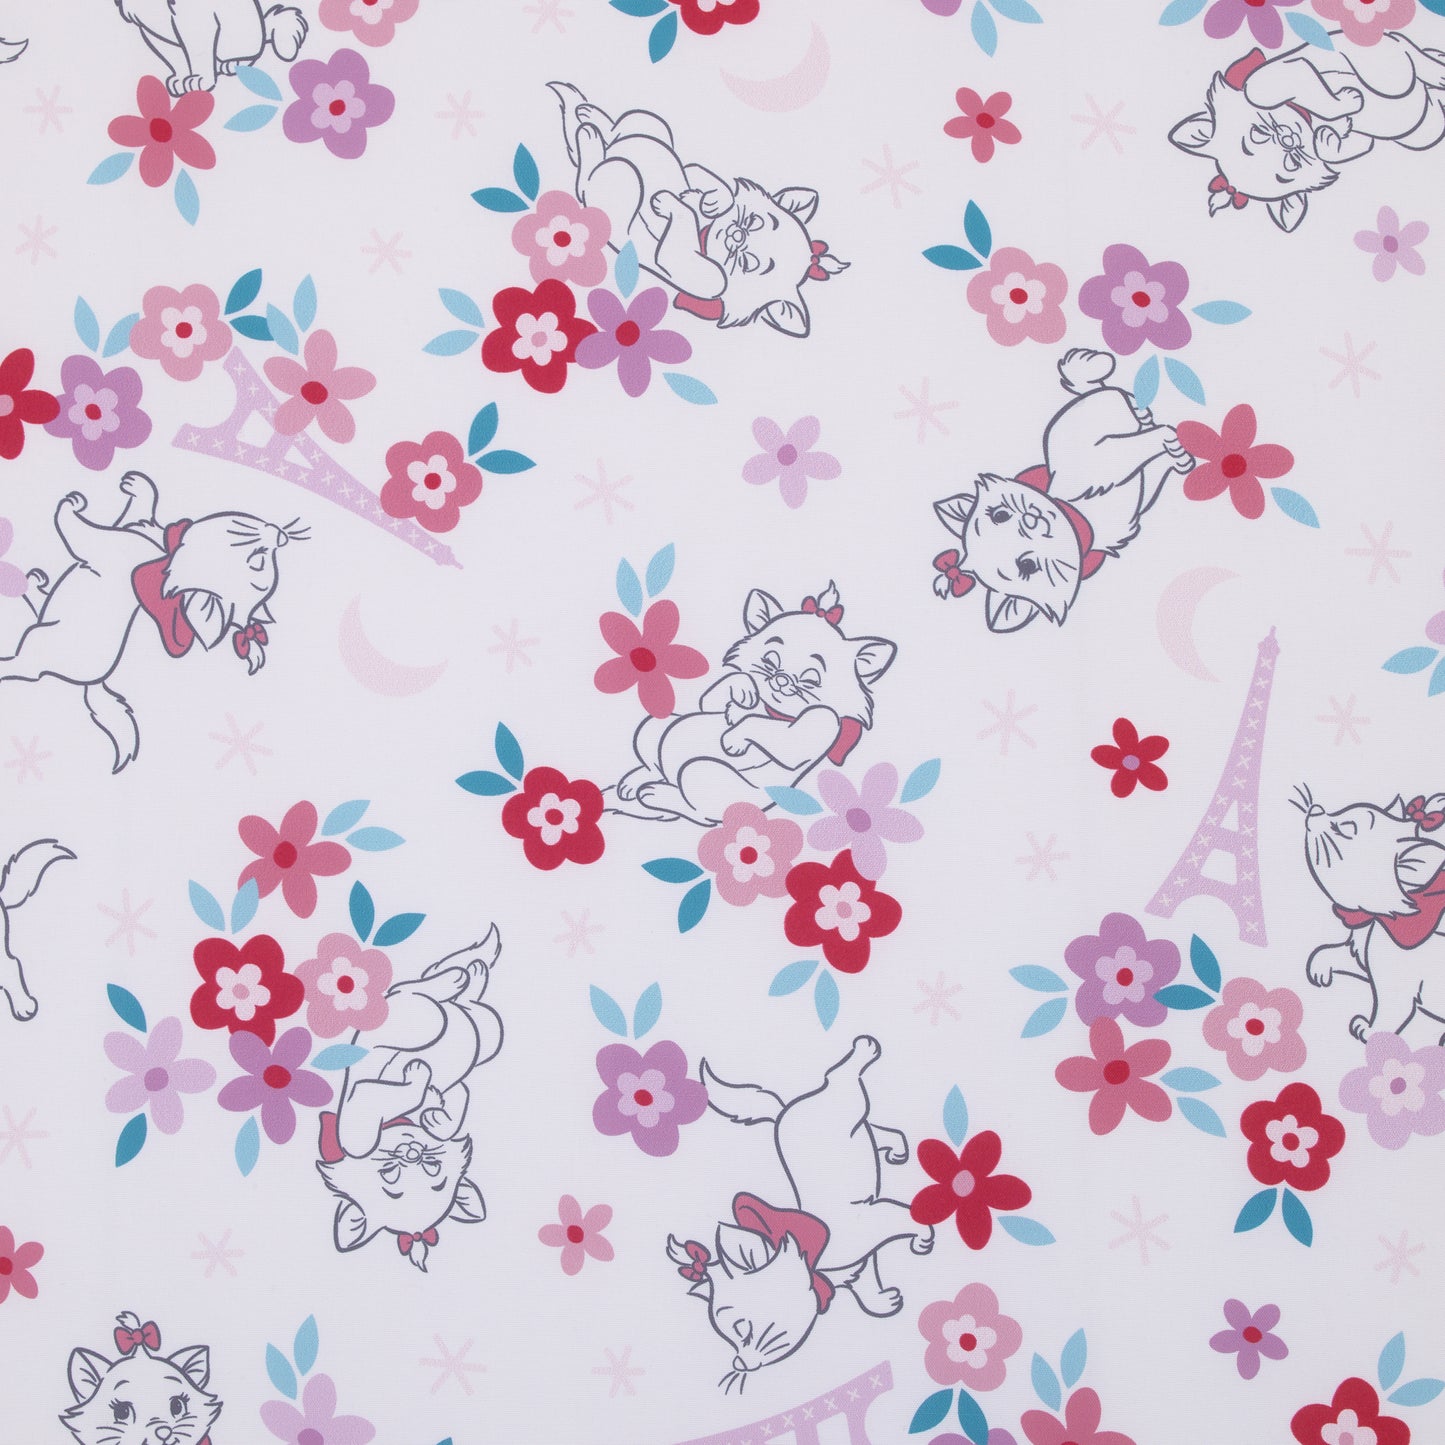 Disney Aristocats Pink, White, and Teal, Marie Super Soft Nursery Fitted Crib Sheet